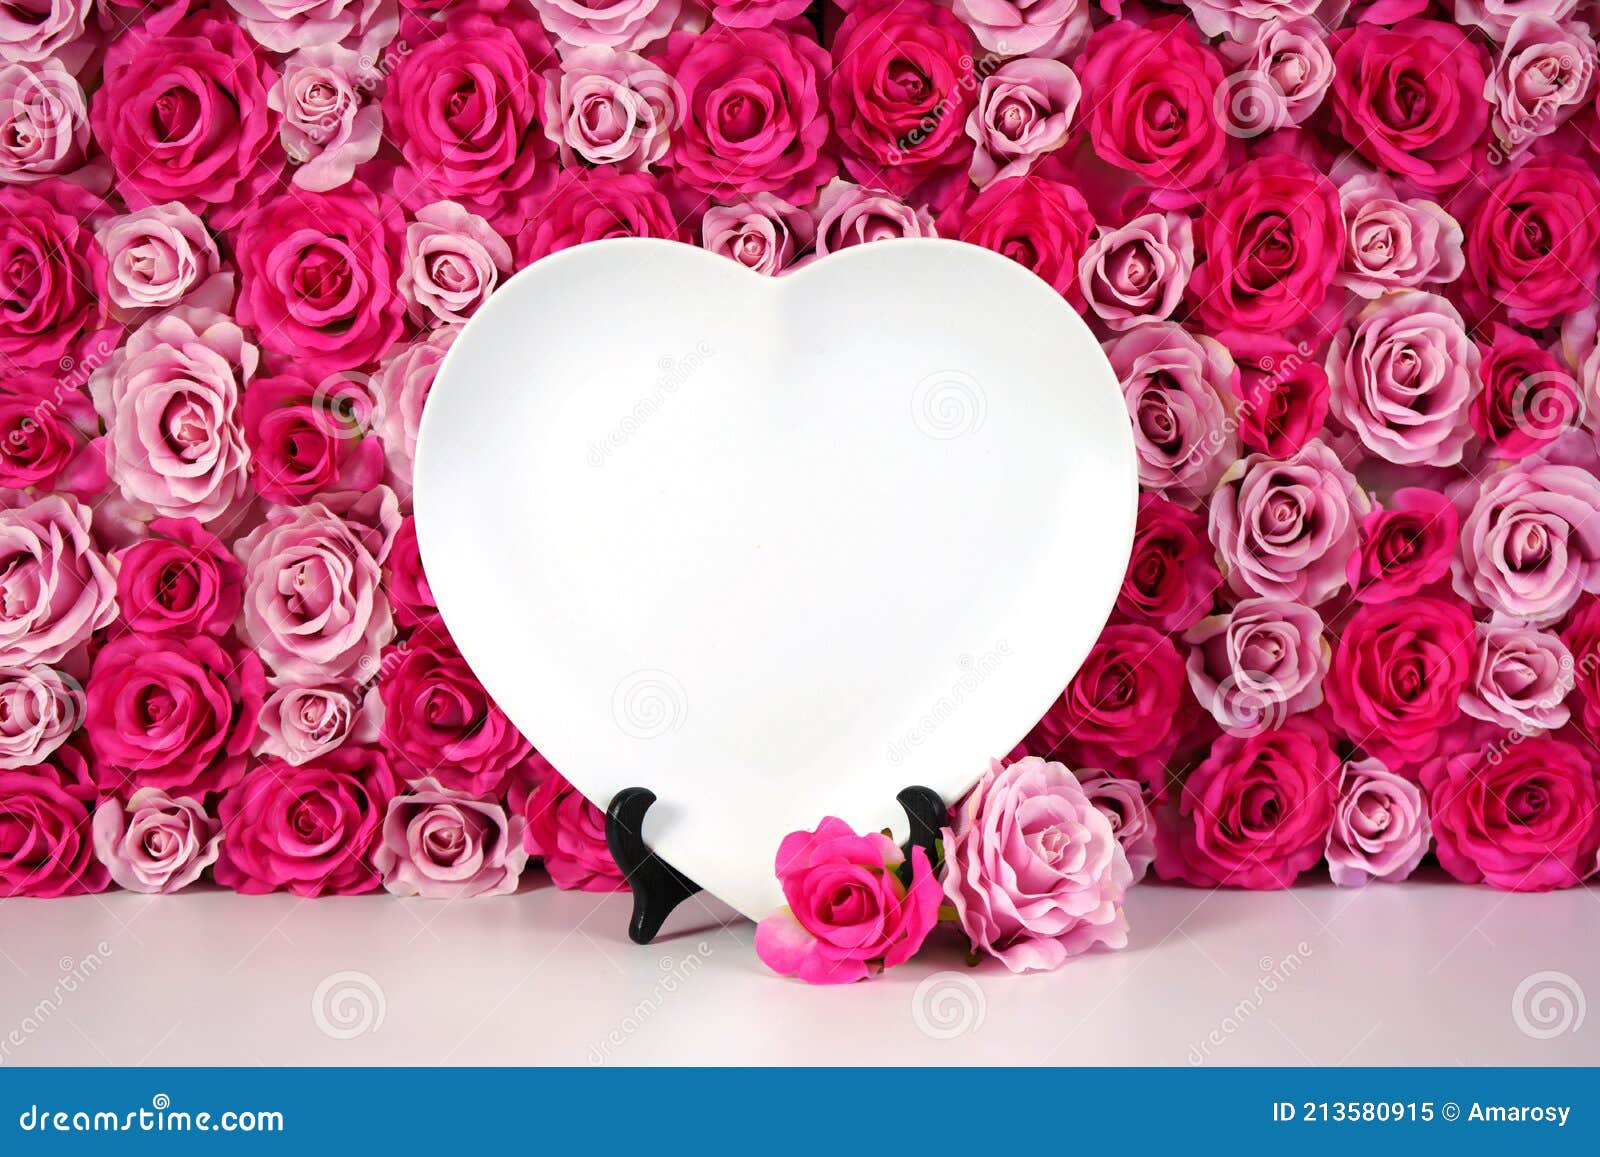 Flower Wall Aesthetic Mother S Day Valentine Wedding Heart Plate Product  Mockup. Stock Image - Image of mockups, valentine: 213580915